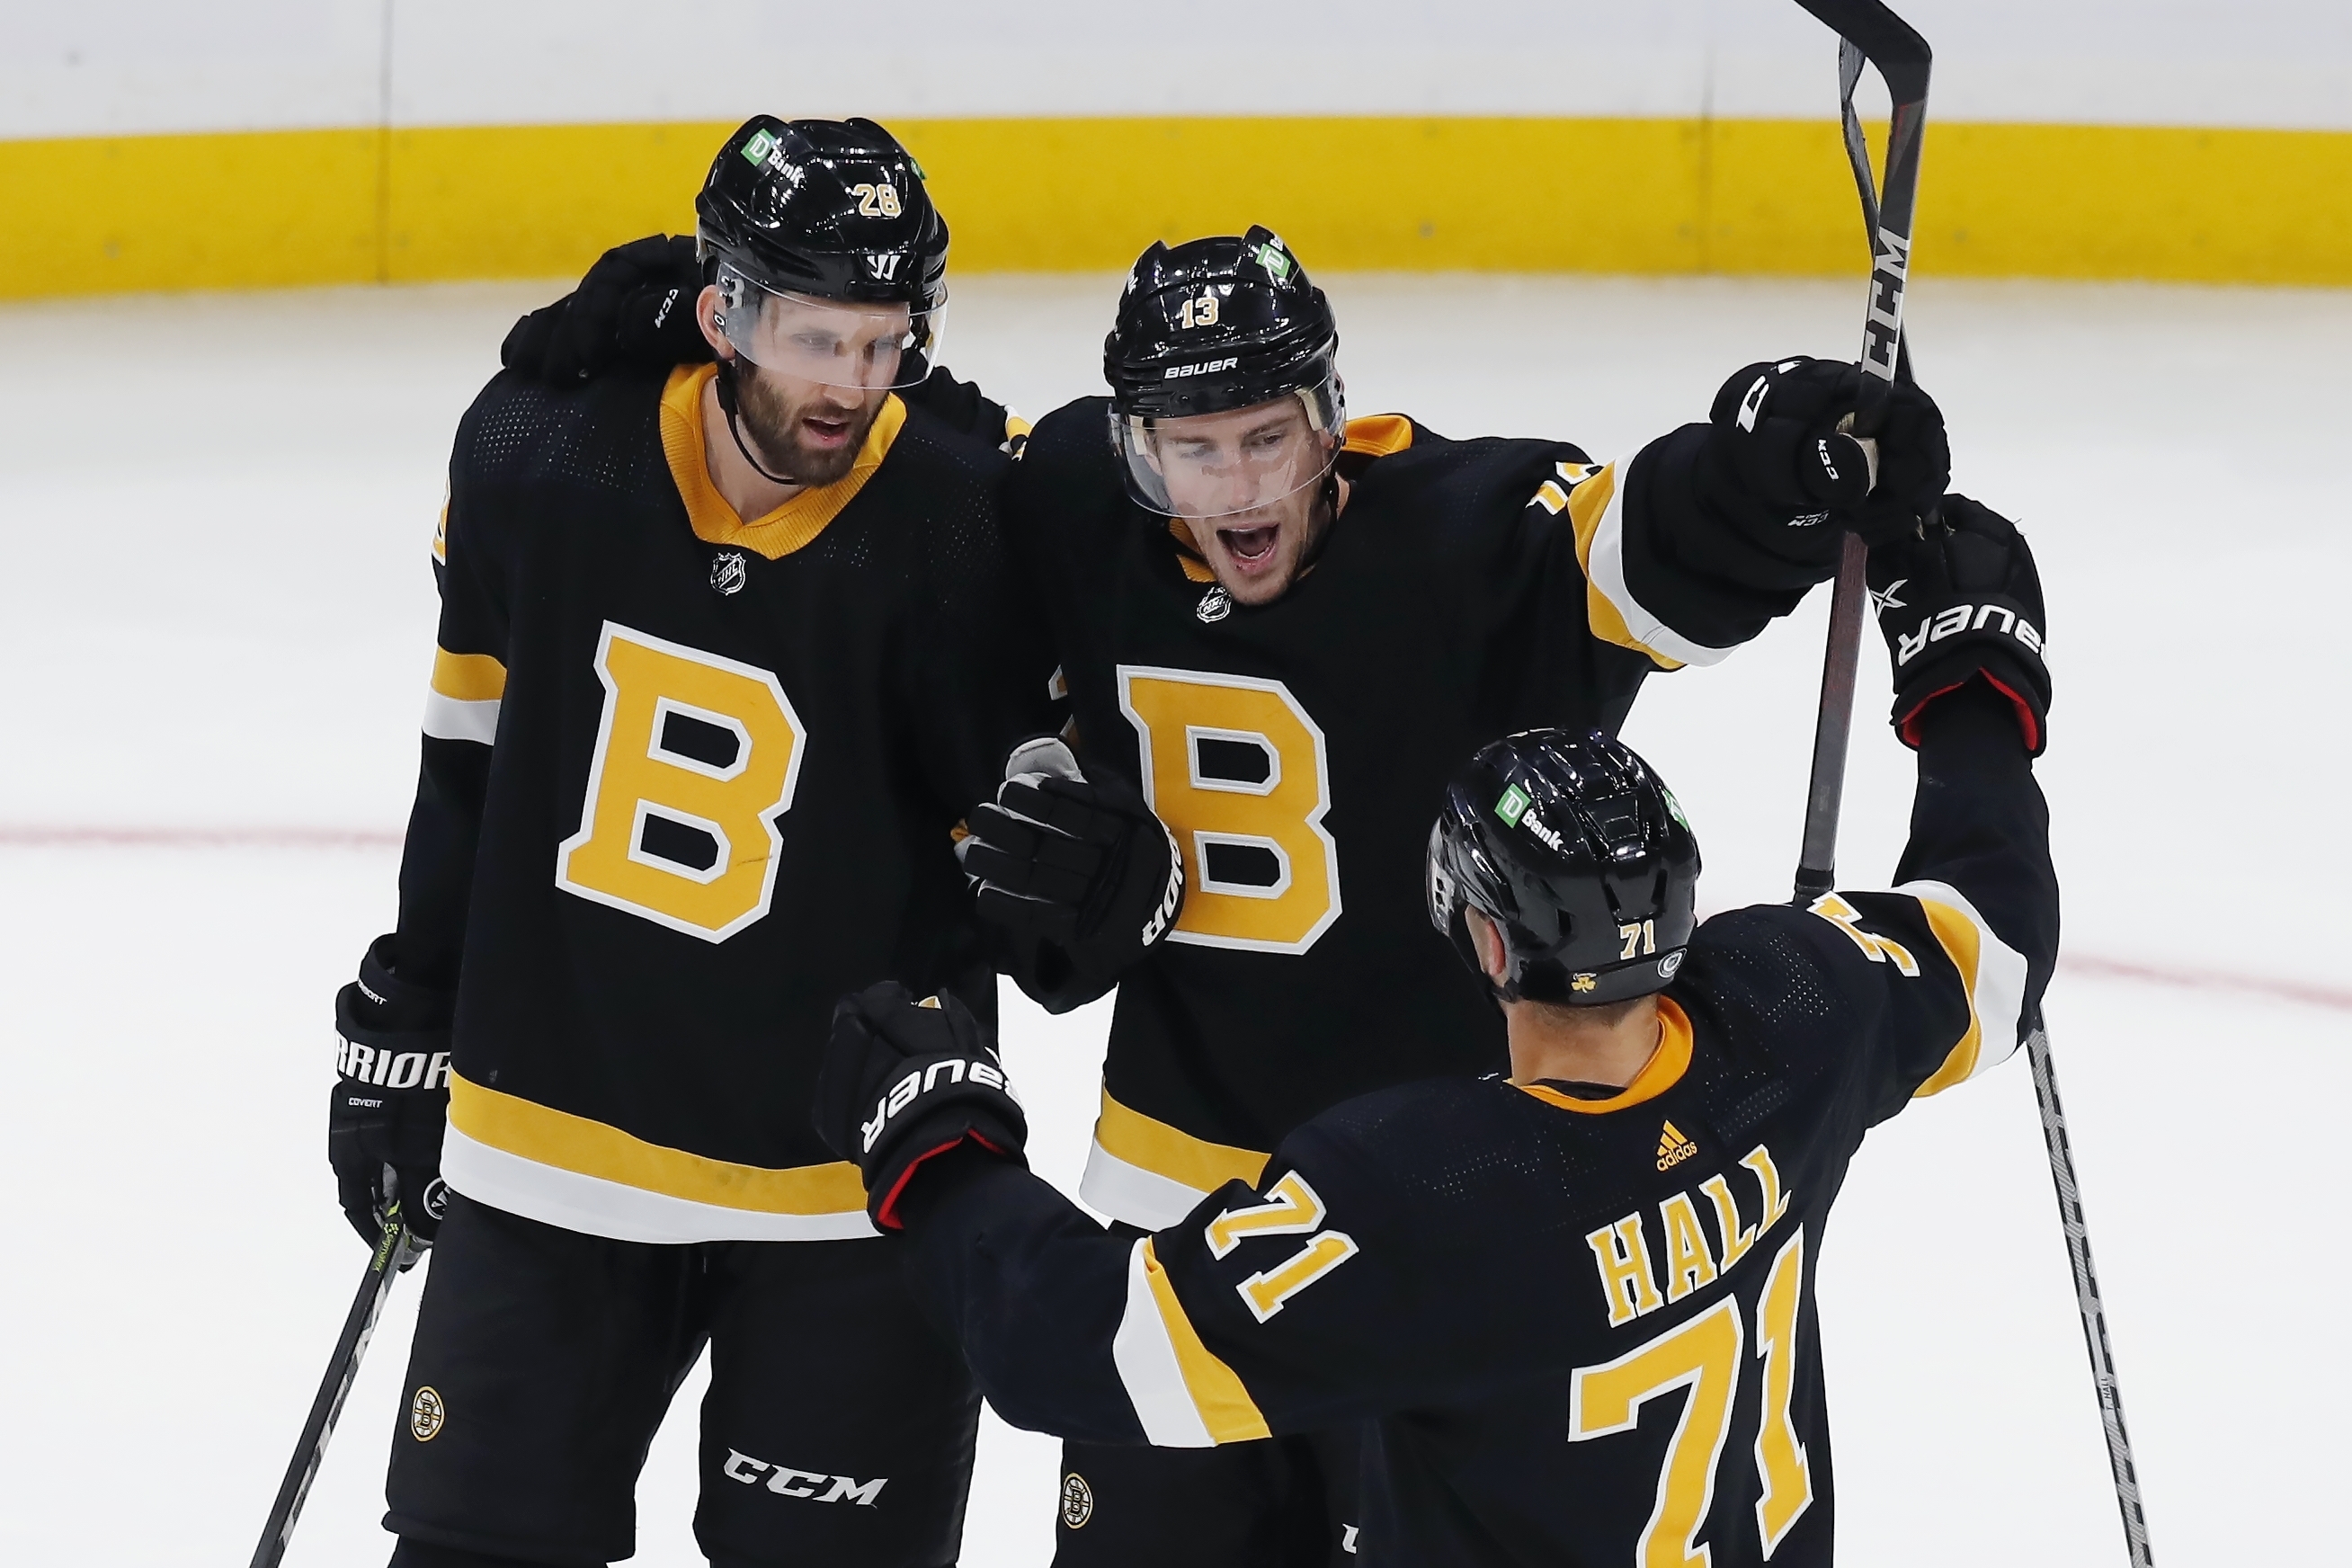 Charlie Coyle, Charlie McAvoy lead Bruins to 5-2 win over Canadiens - The  Globe and Mail